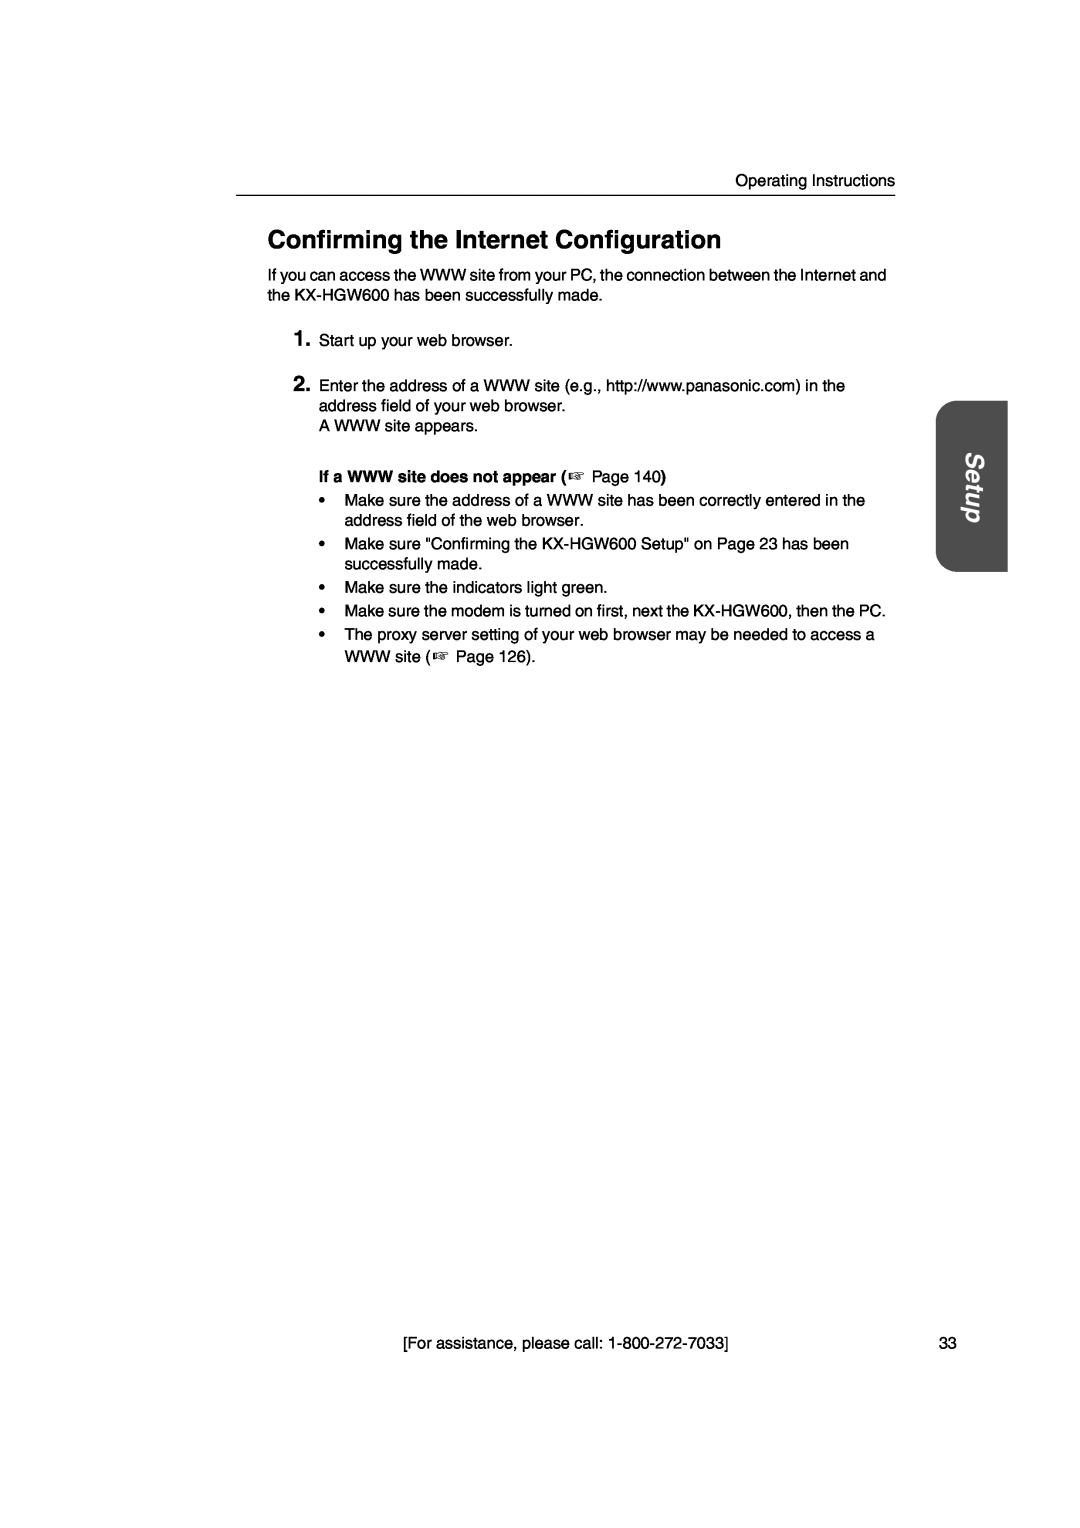 Panasonic KX-HGW600 manual Confirming the Internet Configuration, Setup, If a WWW site does not appear Page 